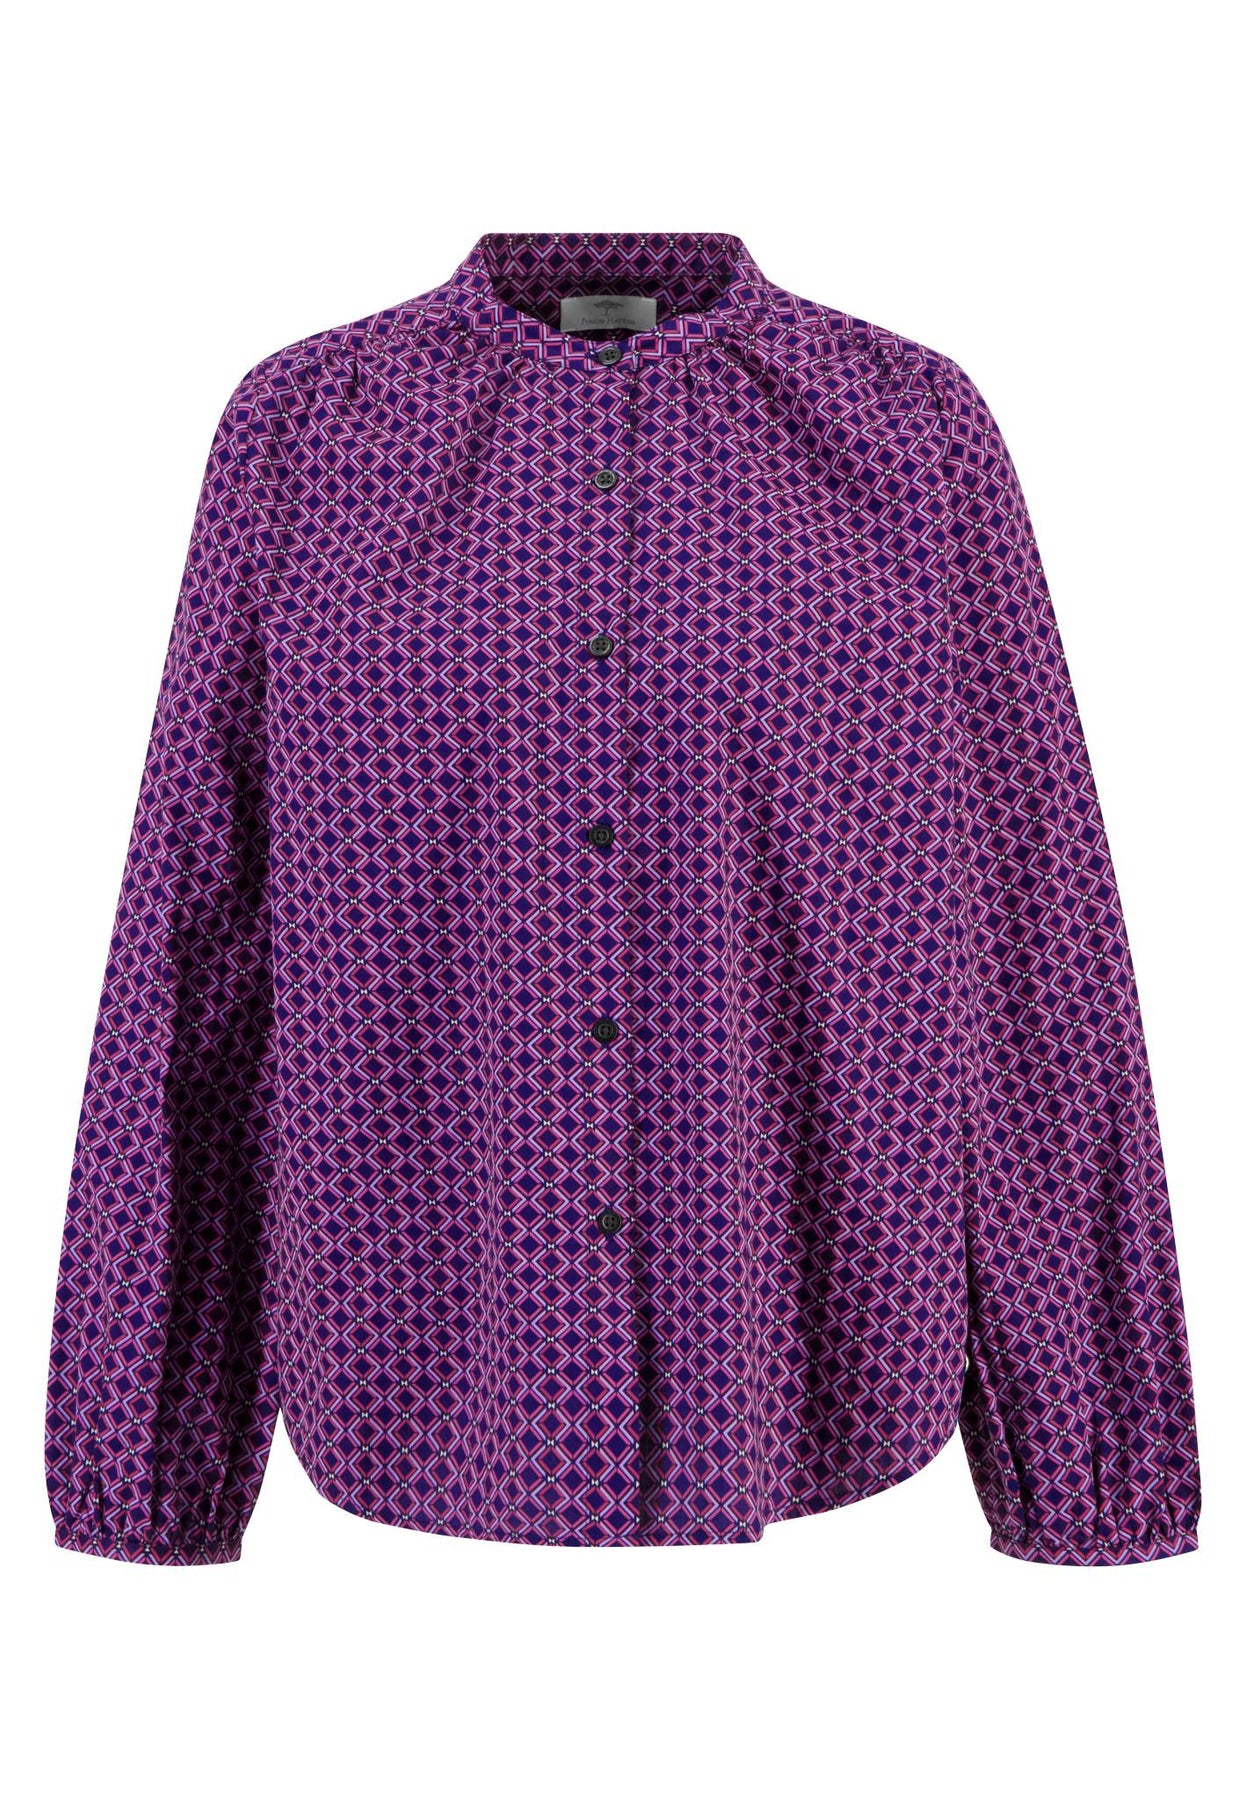 Stand up collar blouse with abstract pattern – FYNCH-HATTON ...